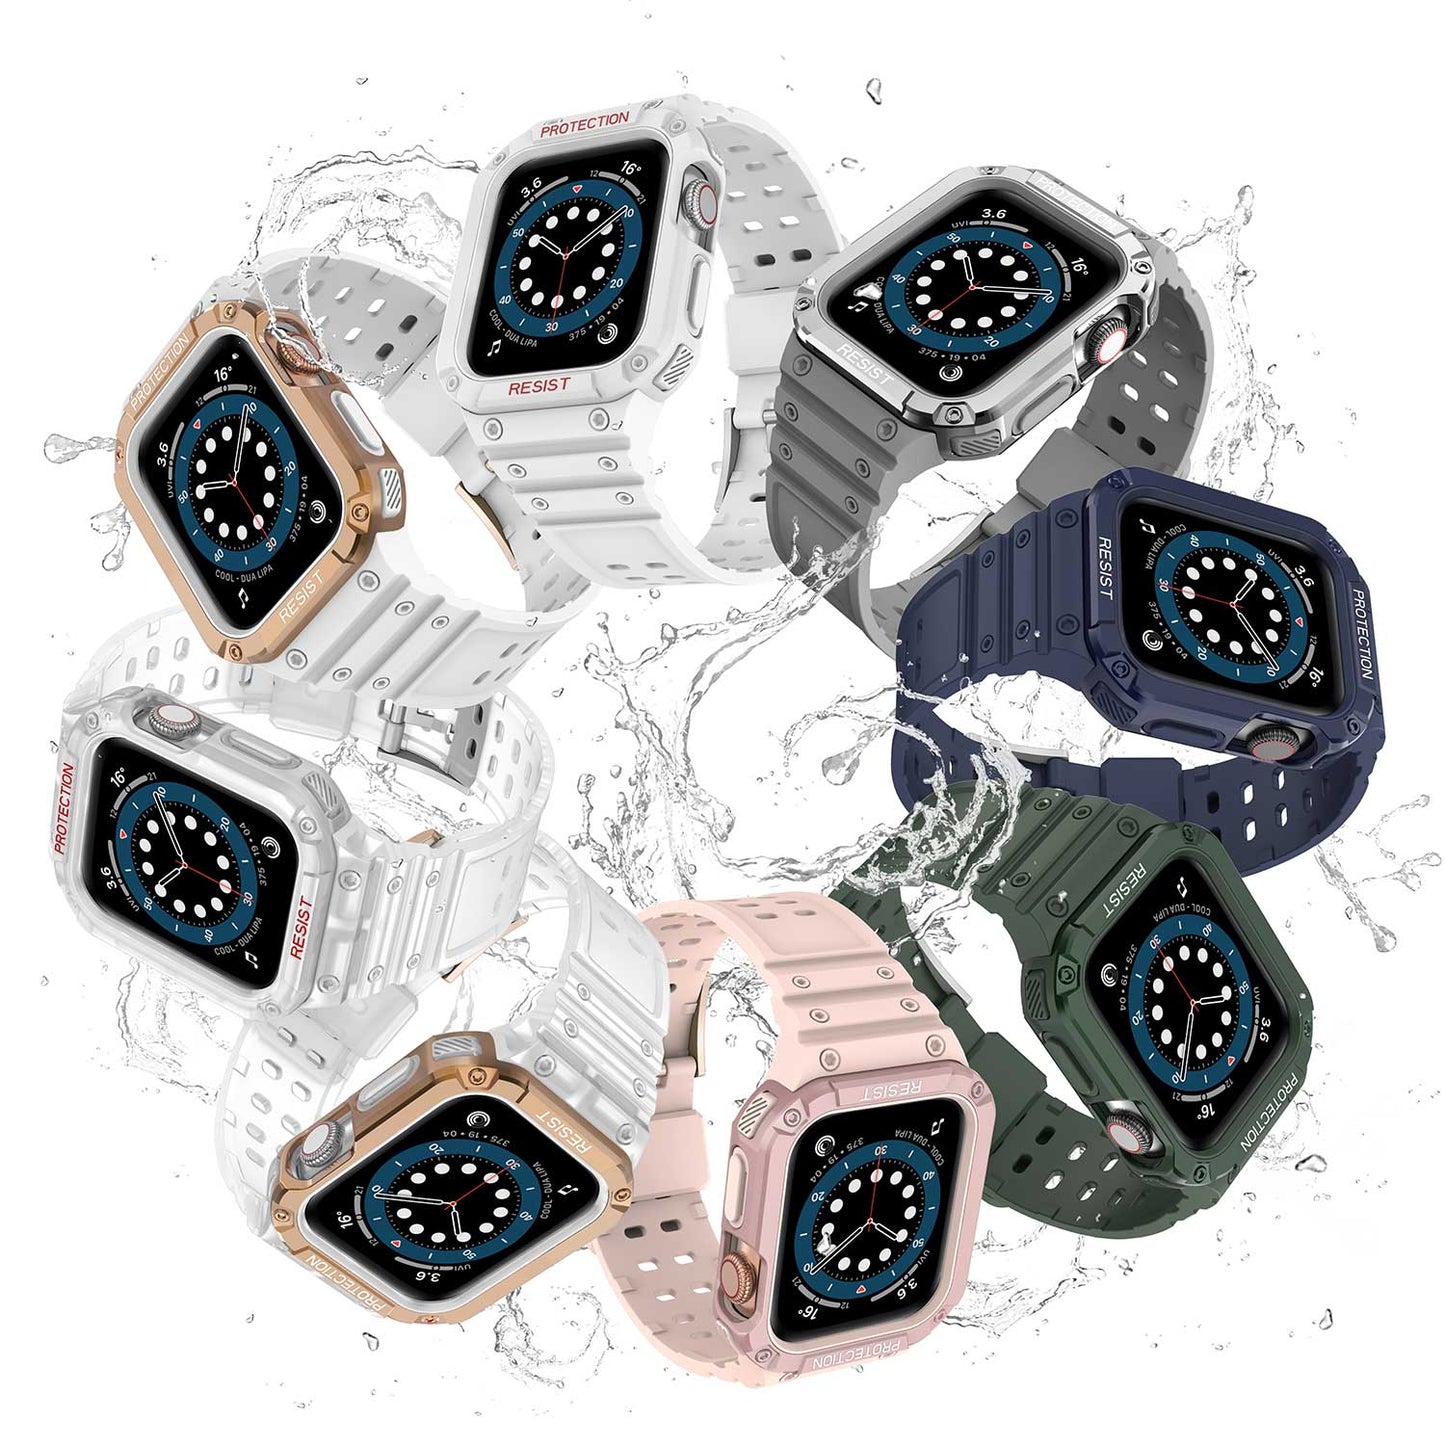 Tough On Apple Watch Band with Case Series 4 / 5 / 6 / SE 40mm Rugged Protection Clear/Clear